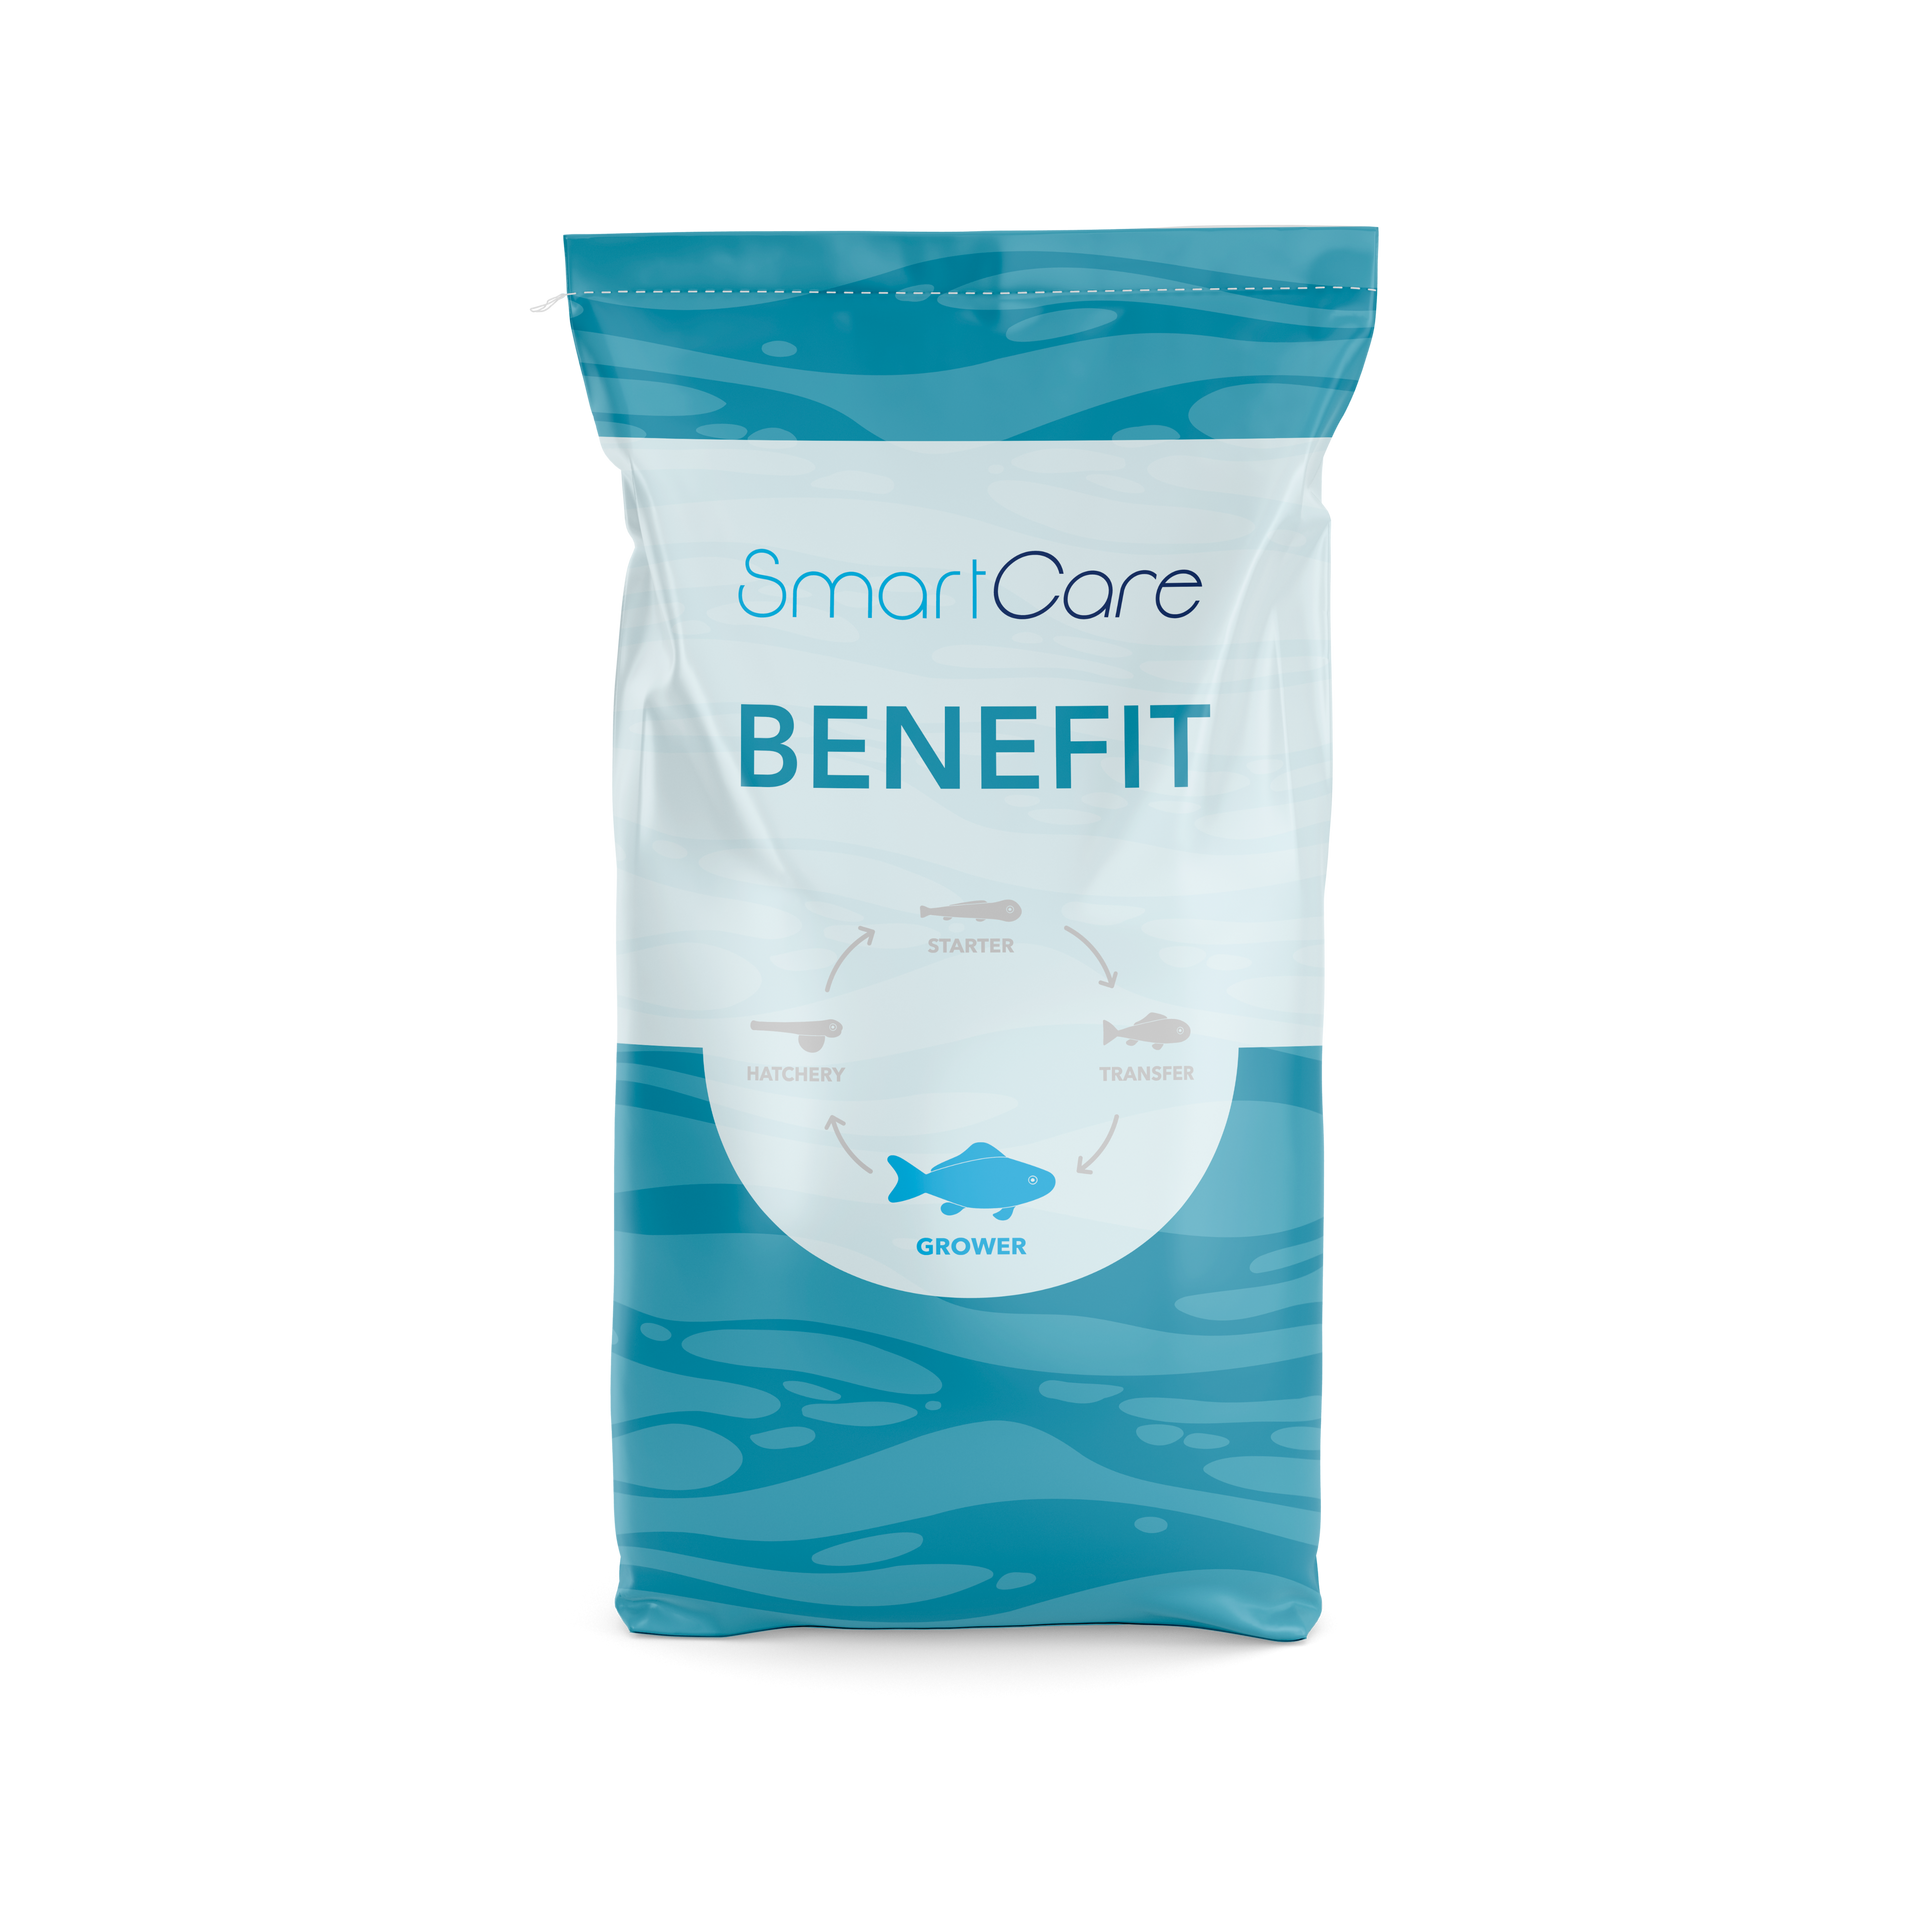 SmartCare BeneFIT health feed for trout